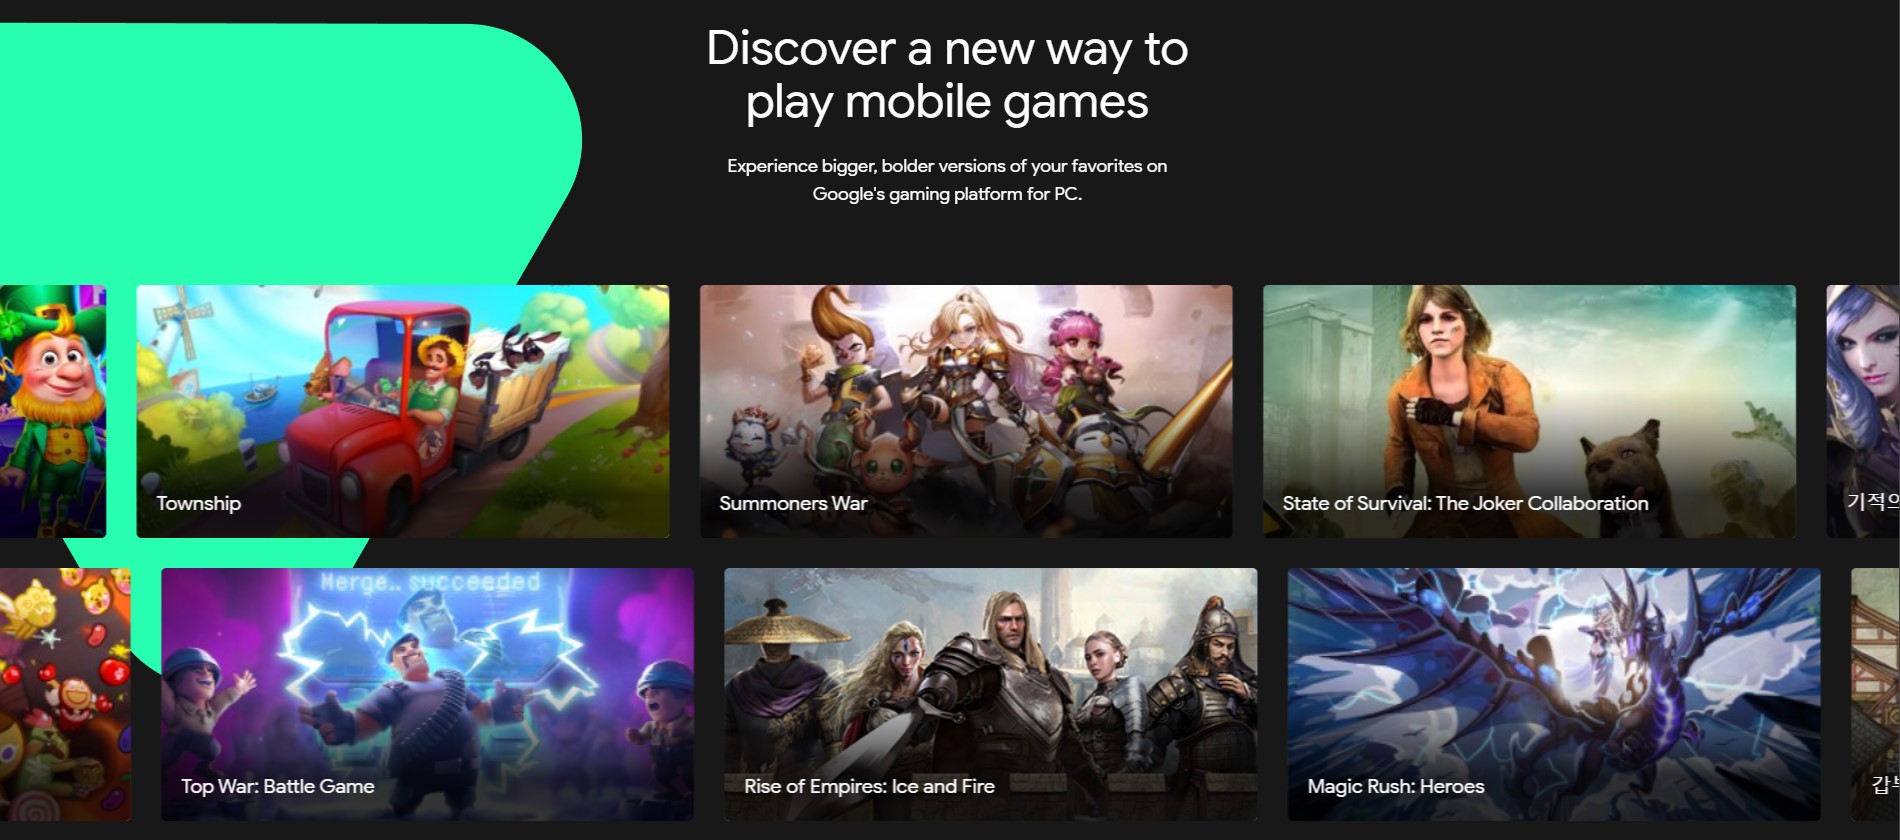 Google Play Games PC Beta expands its availability to more markets -  SamMobile